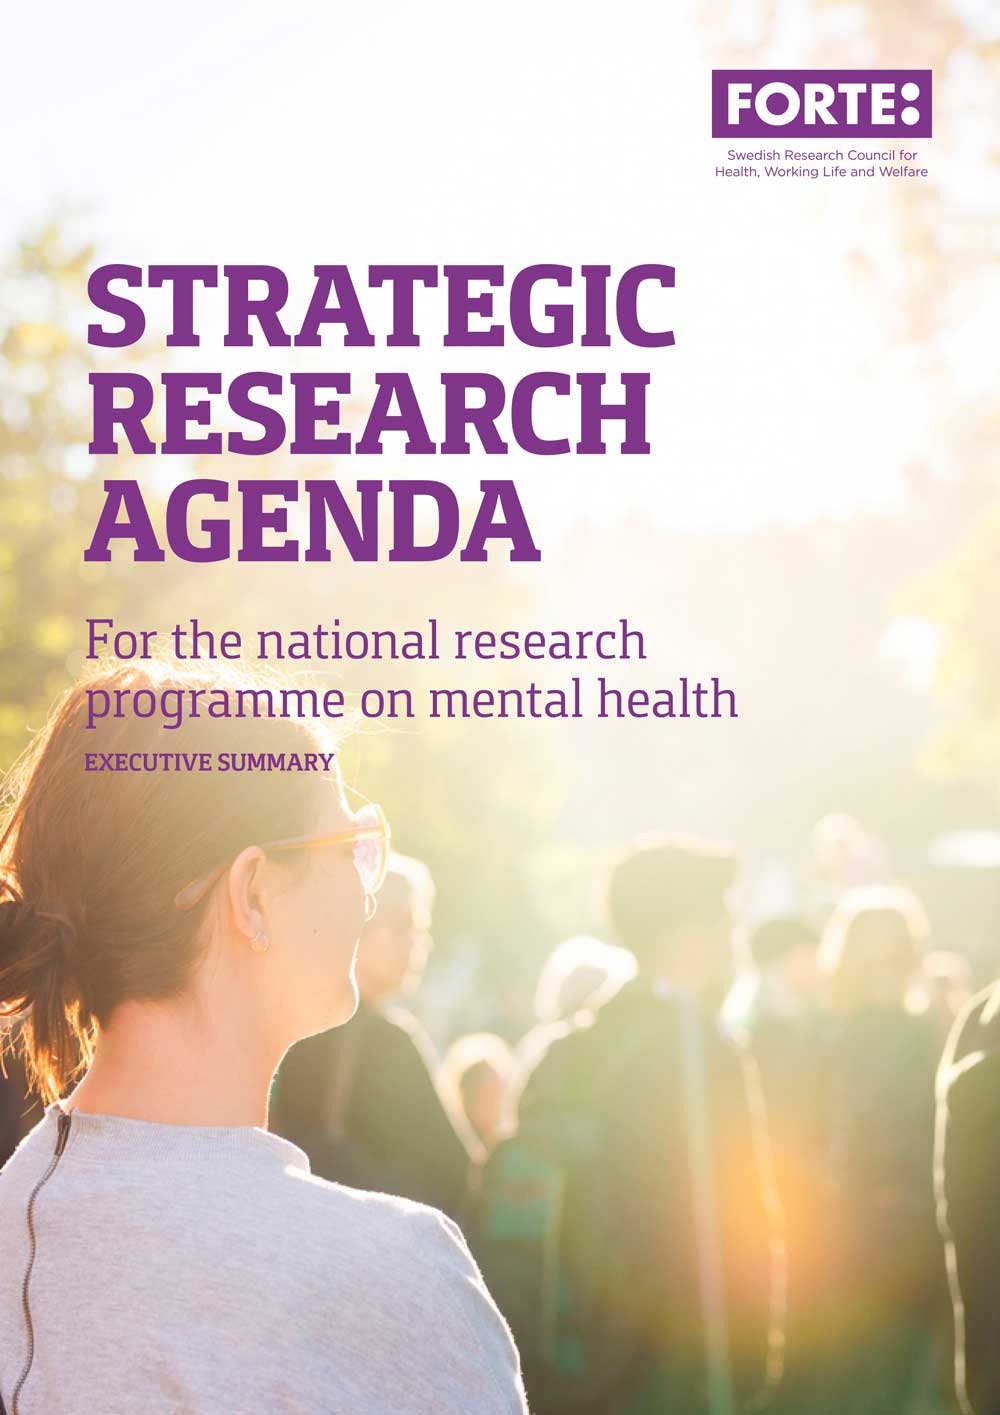 Strategic research agenda for the national research programme on mental health